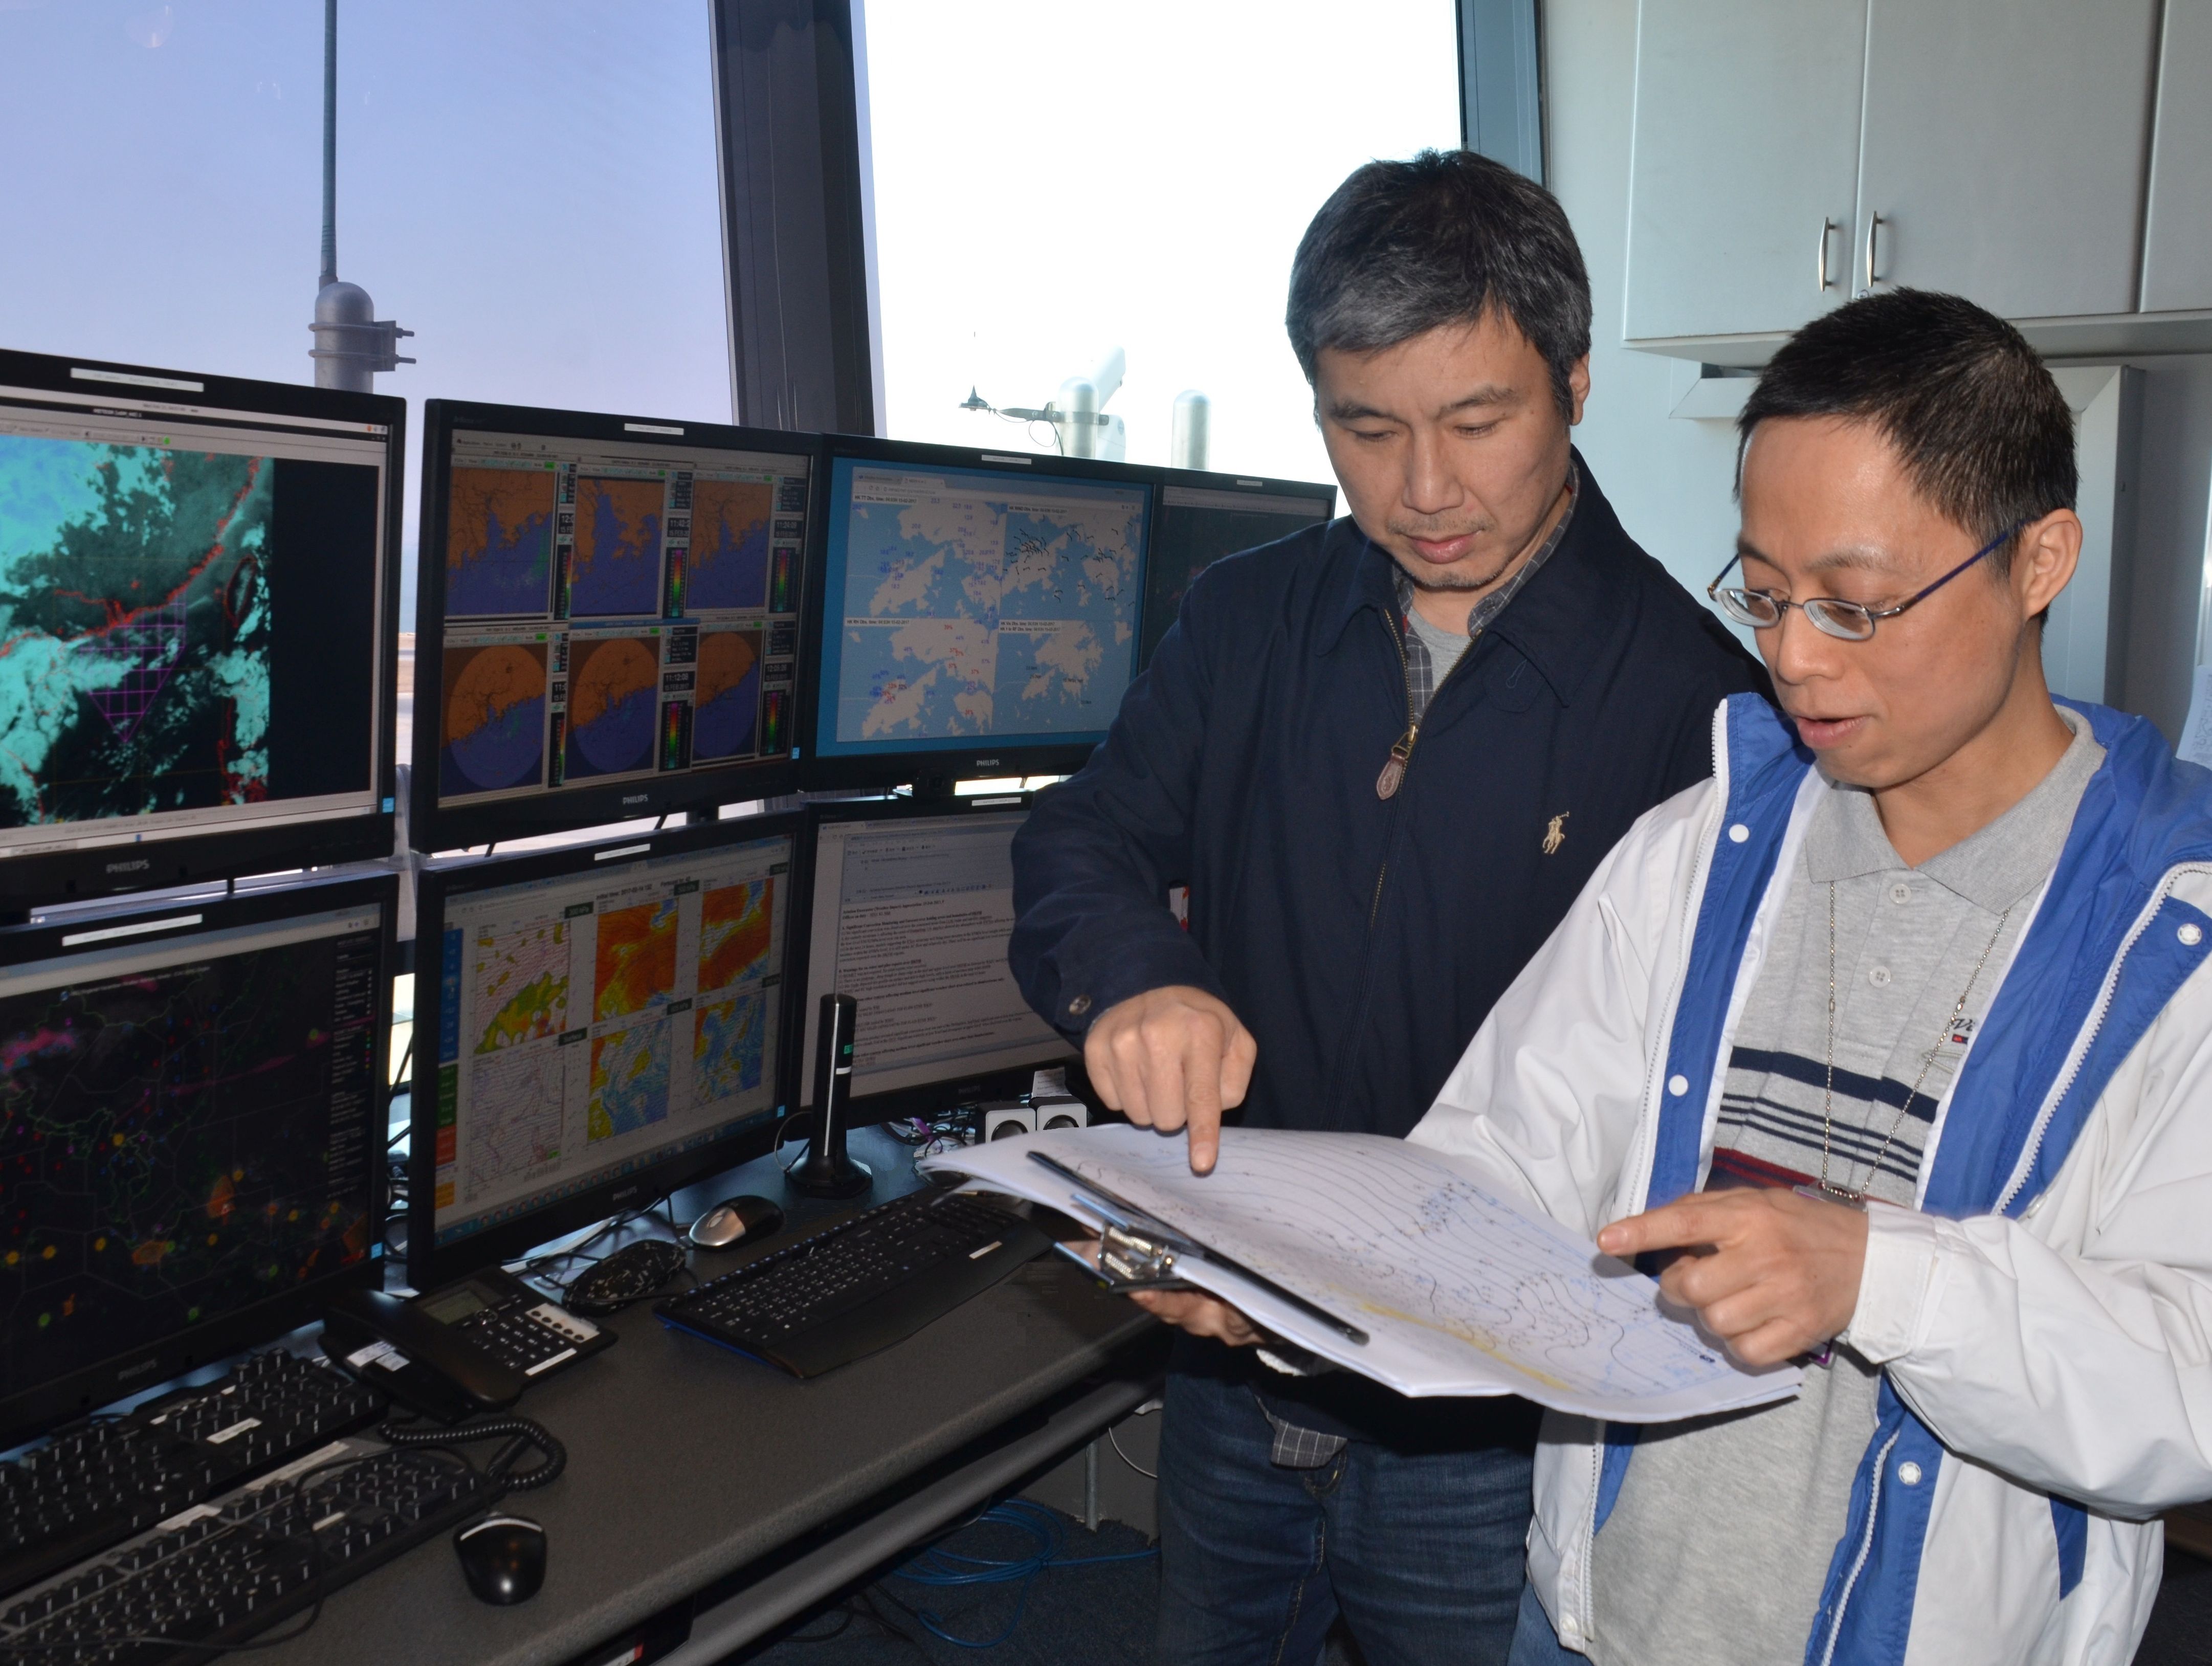 The aviation weather forecaster and assistant aviation weather forecaster